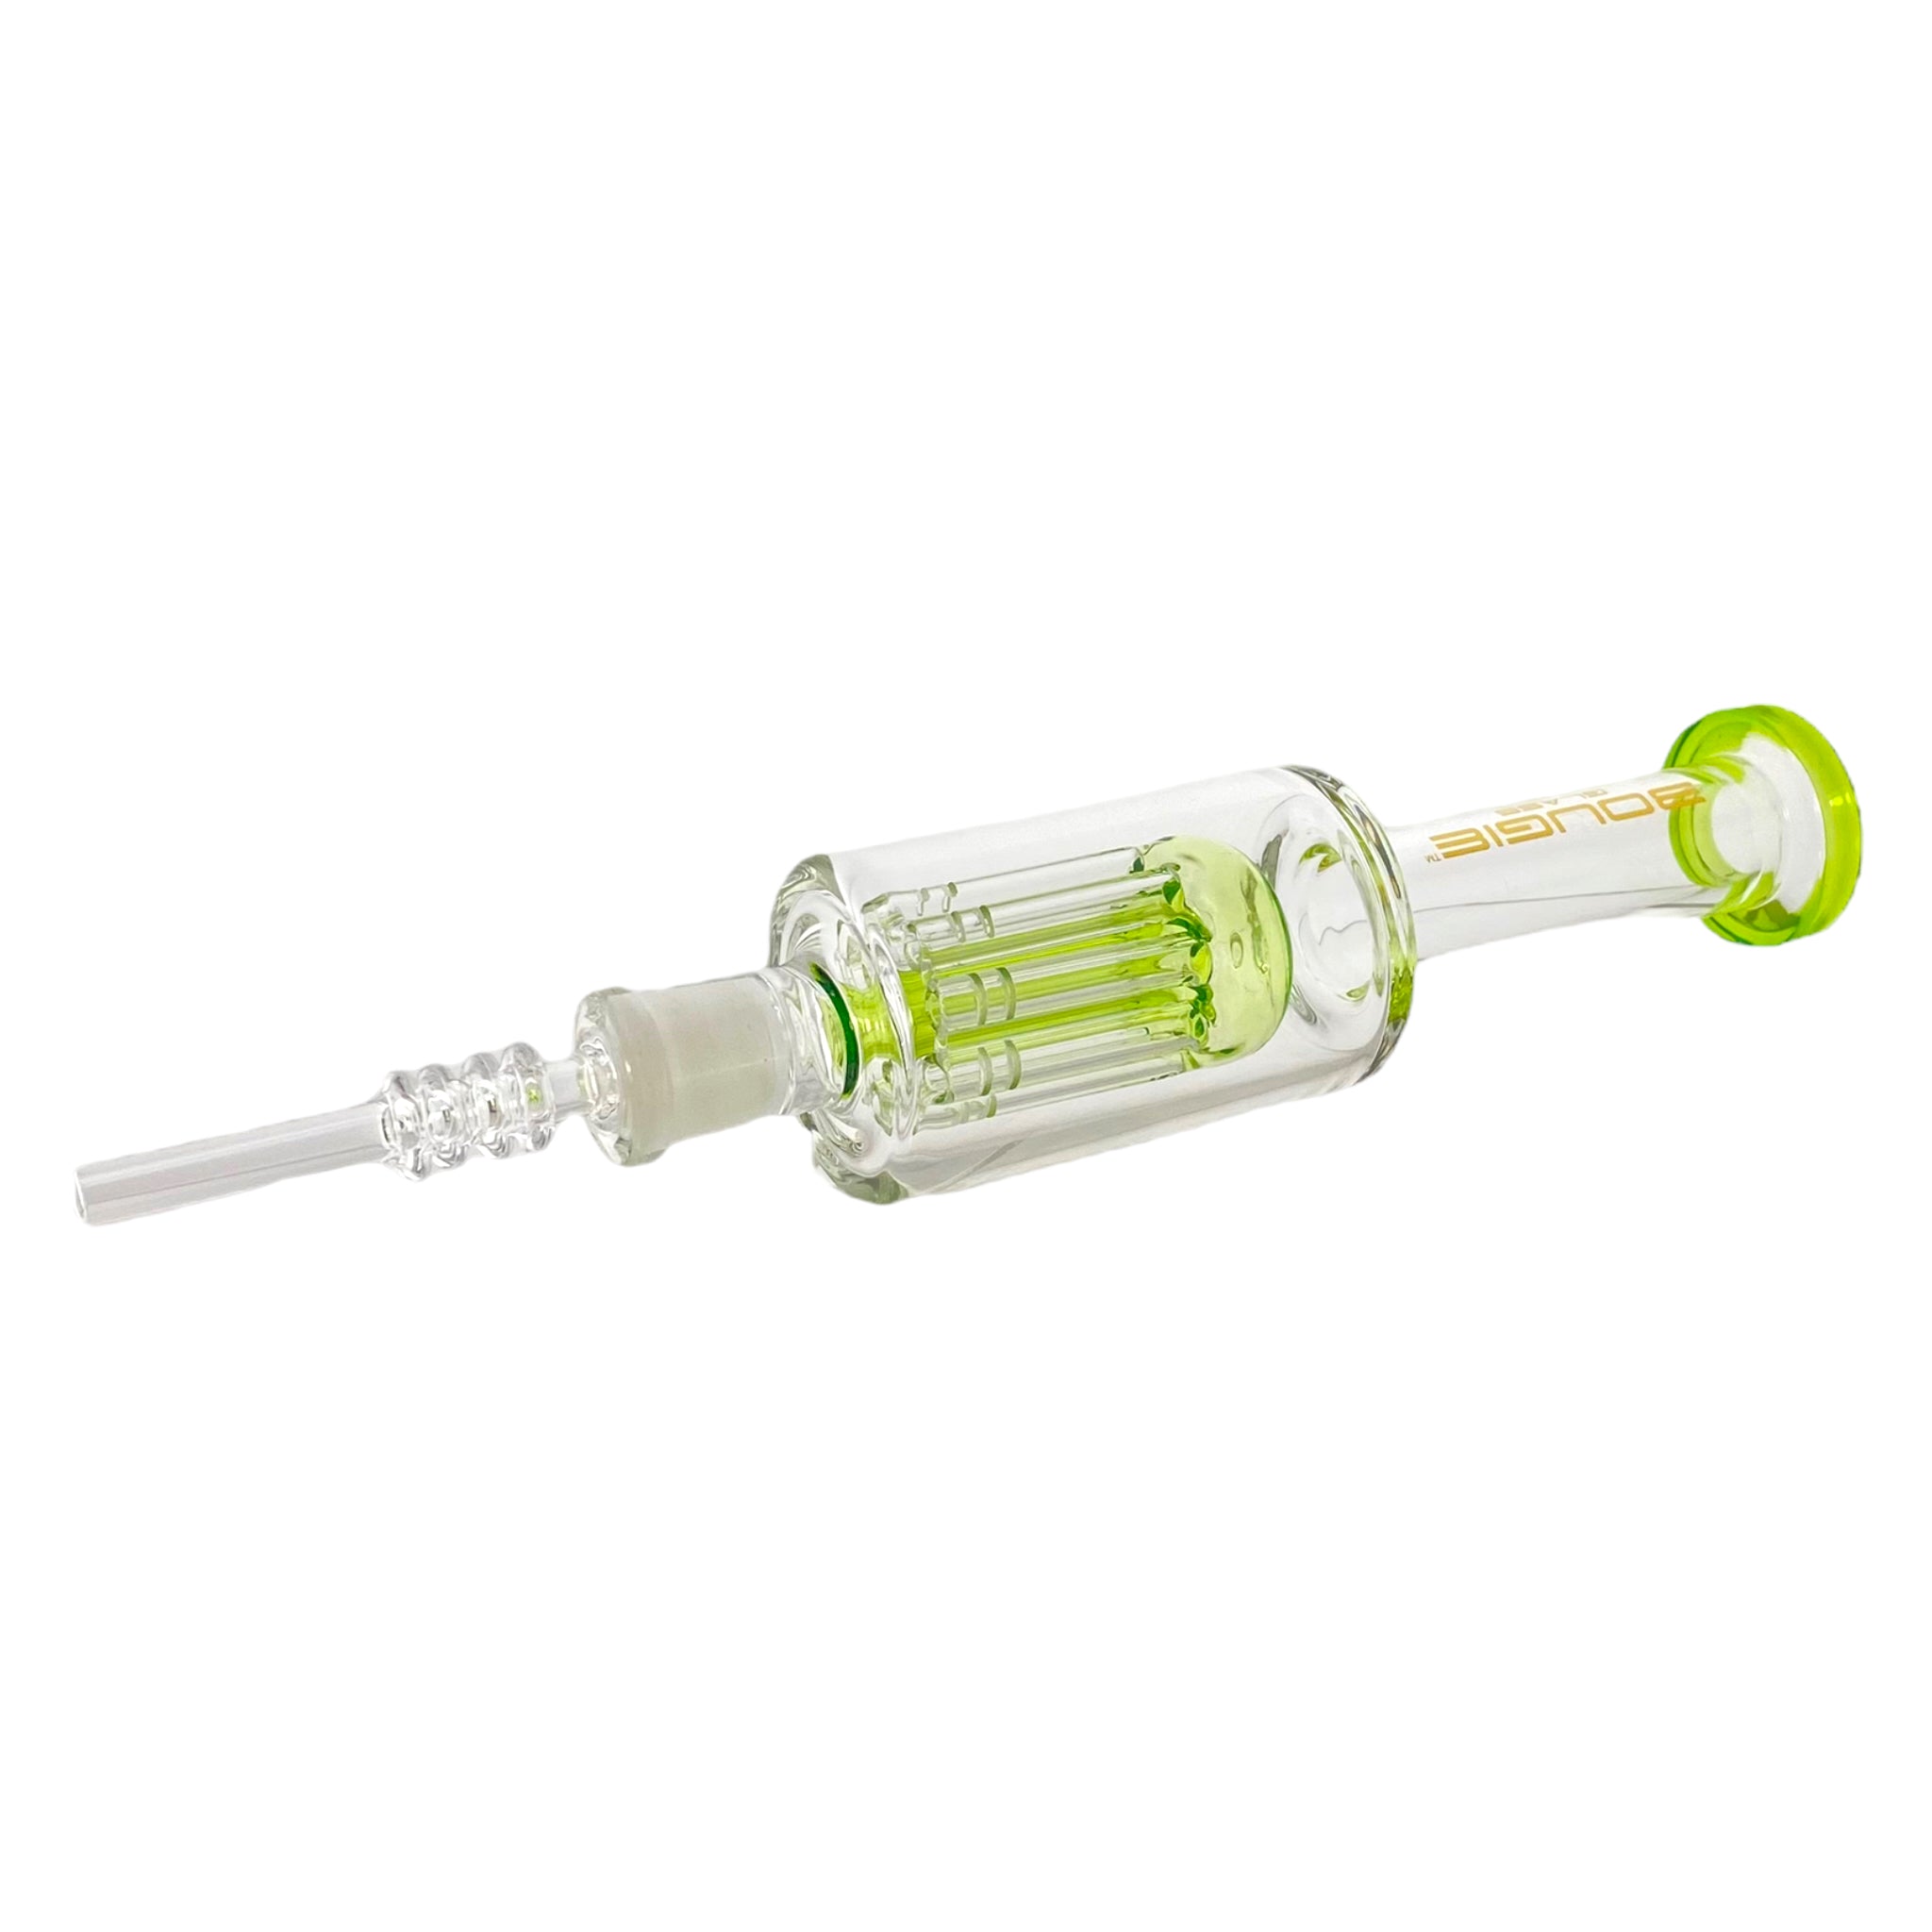 made in america Bougie Glass - Green Nectar Collector With 8 Arm Tree Perc